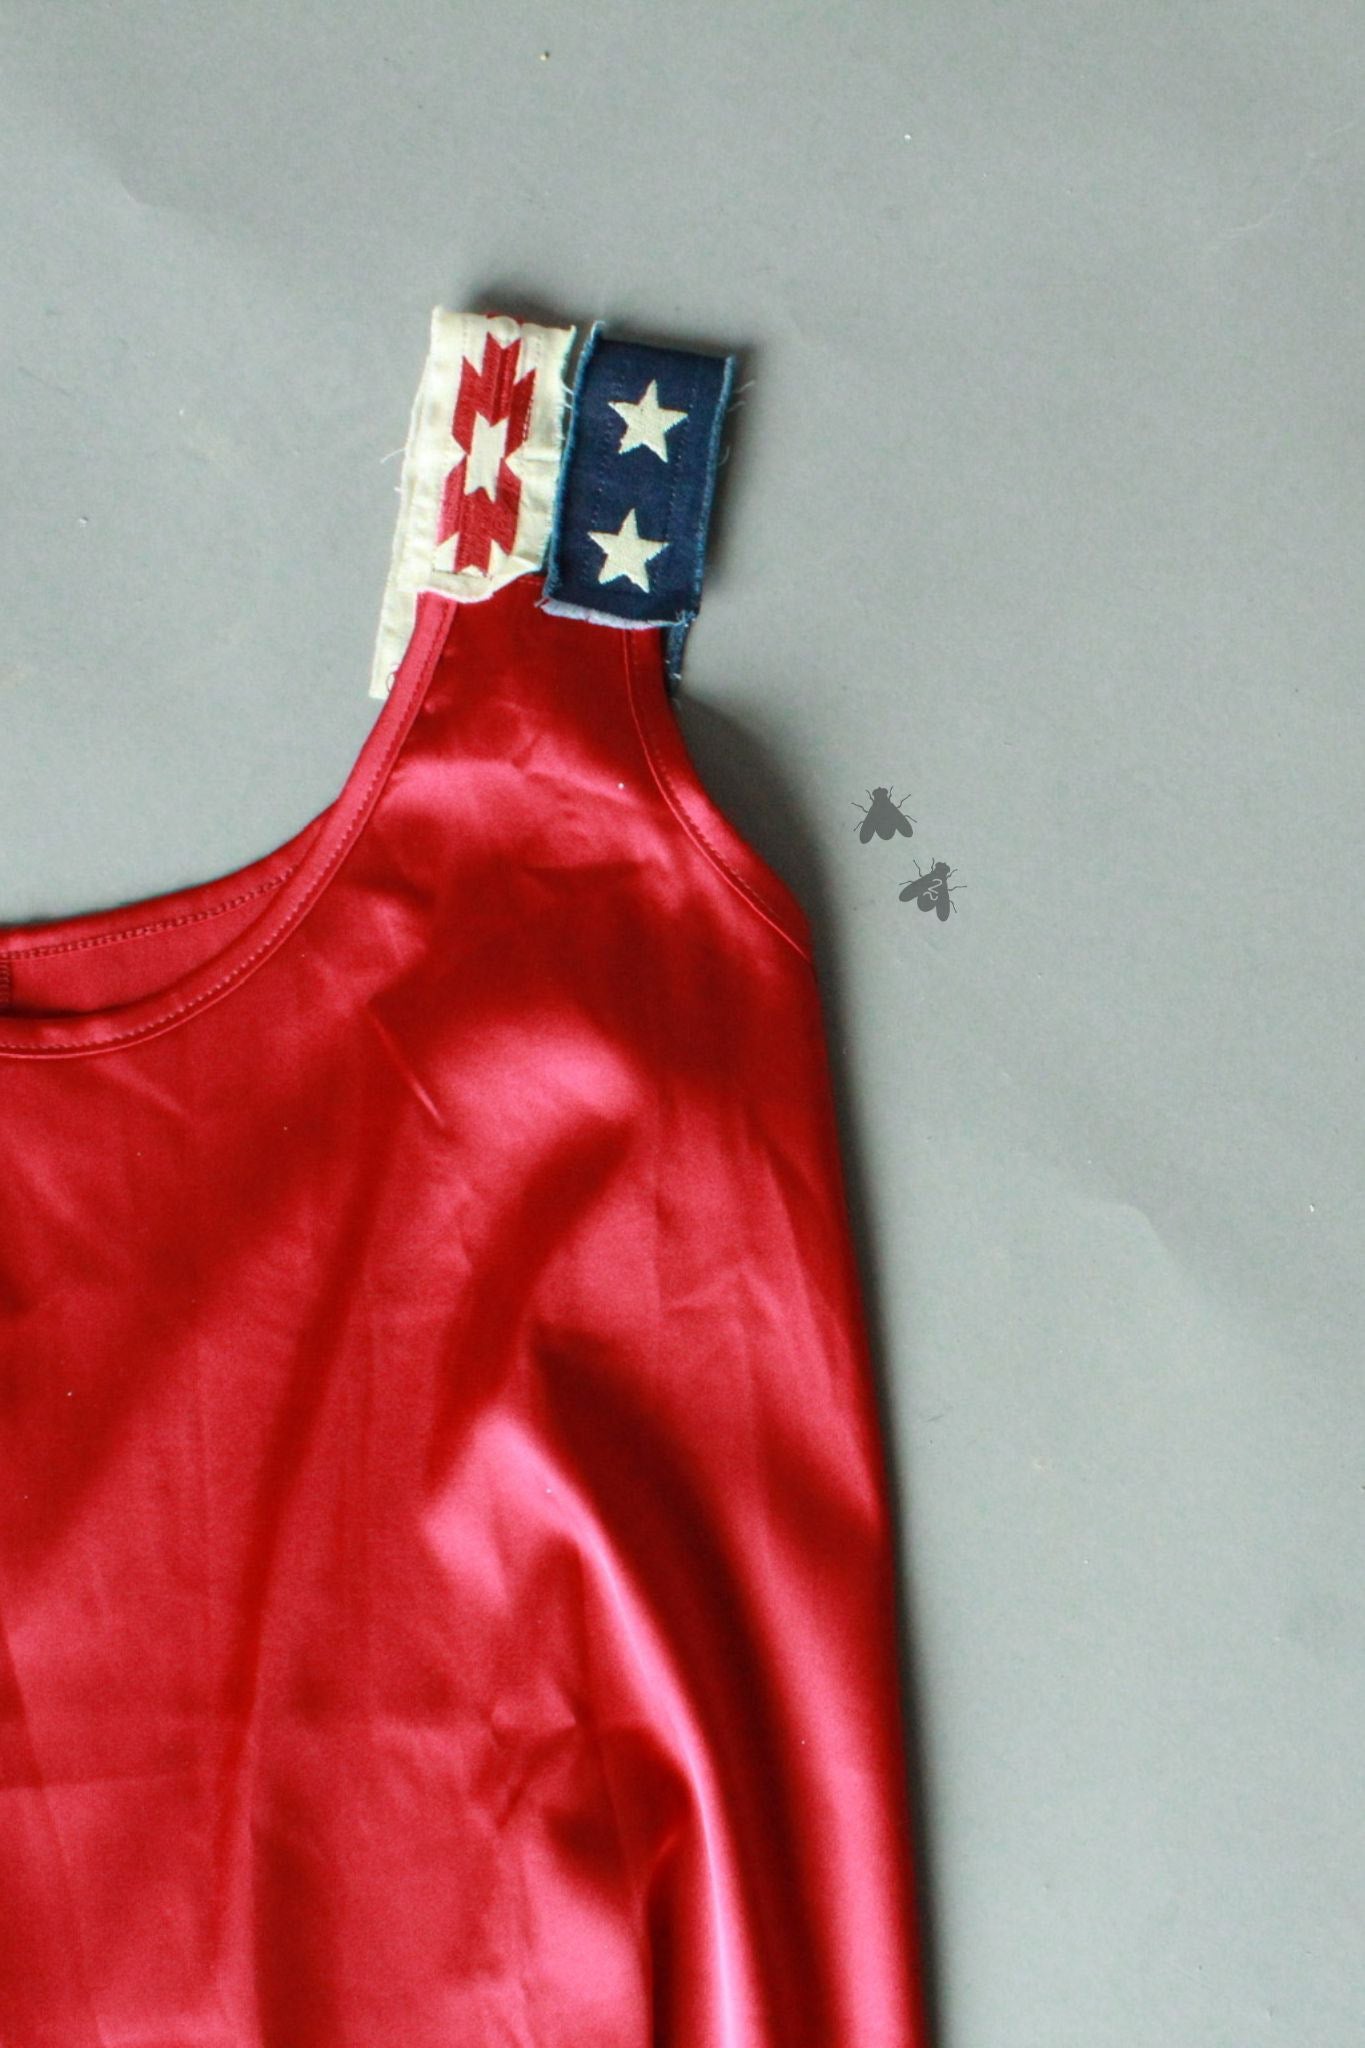 The Betsy Ross Tank Top